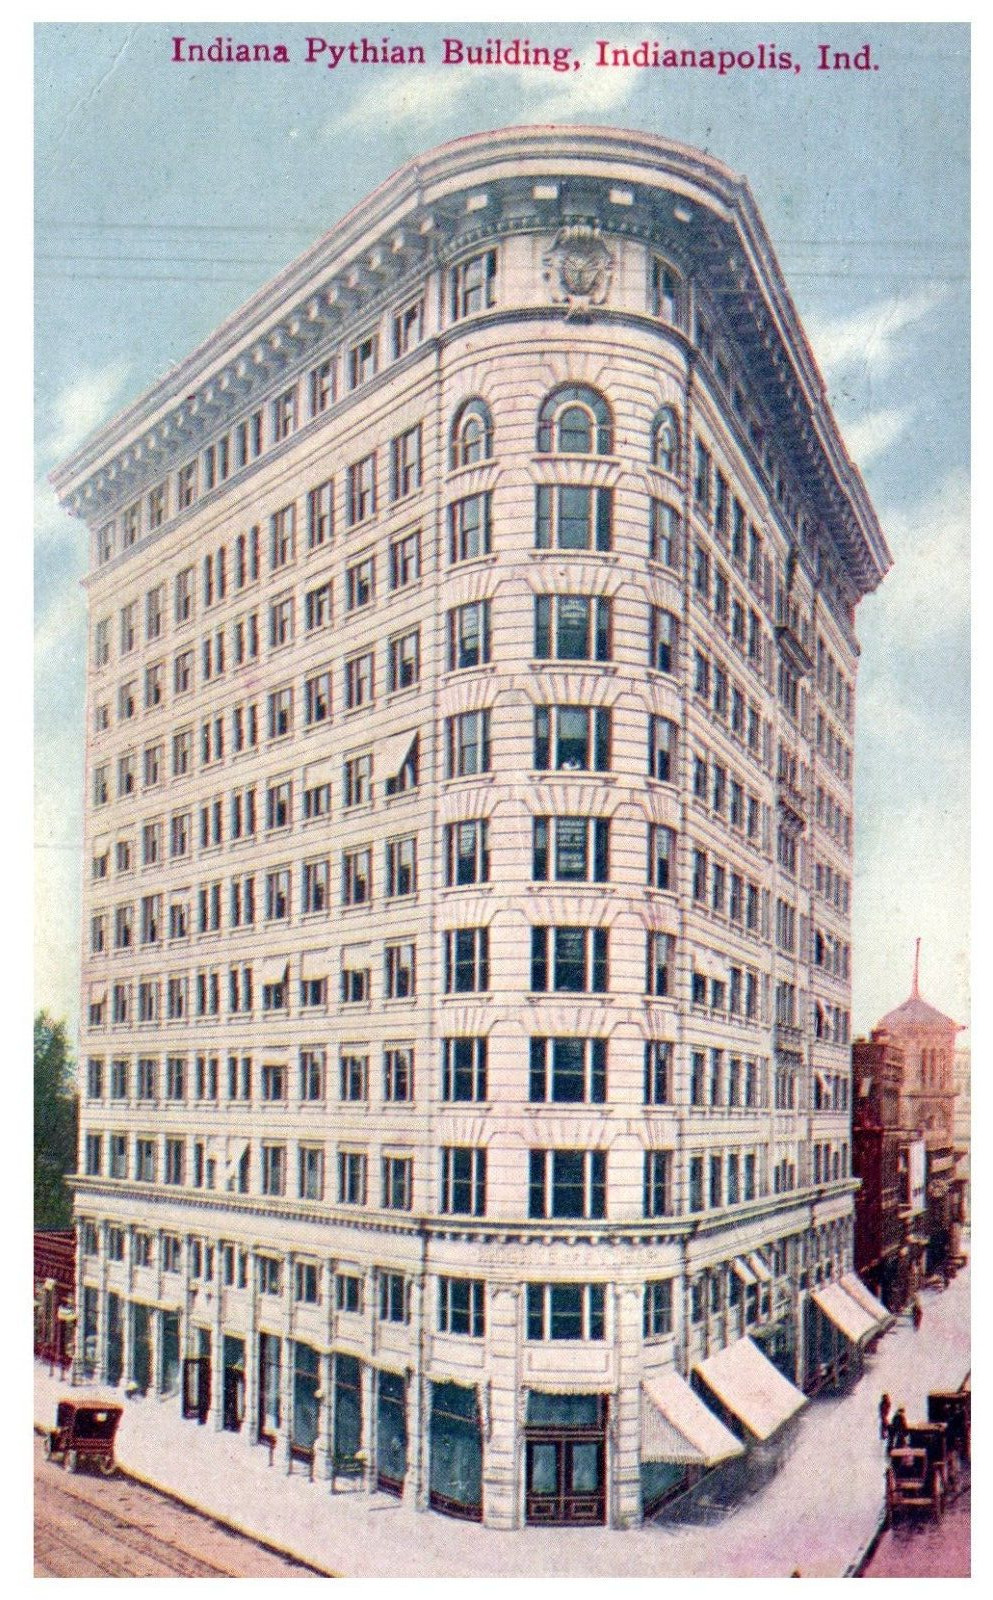 Indianapolis Indiana Pythian Building Antique Postcard Posted 1909